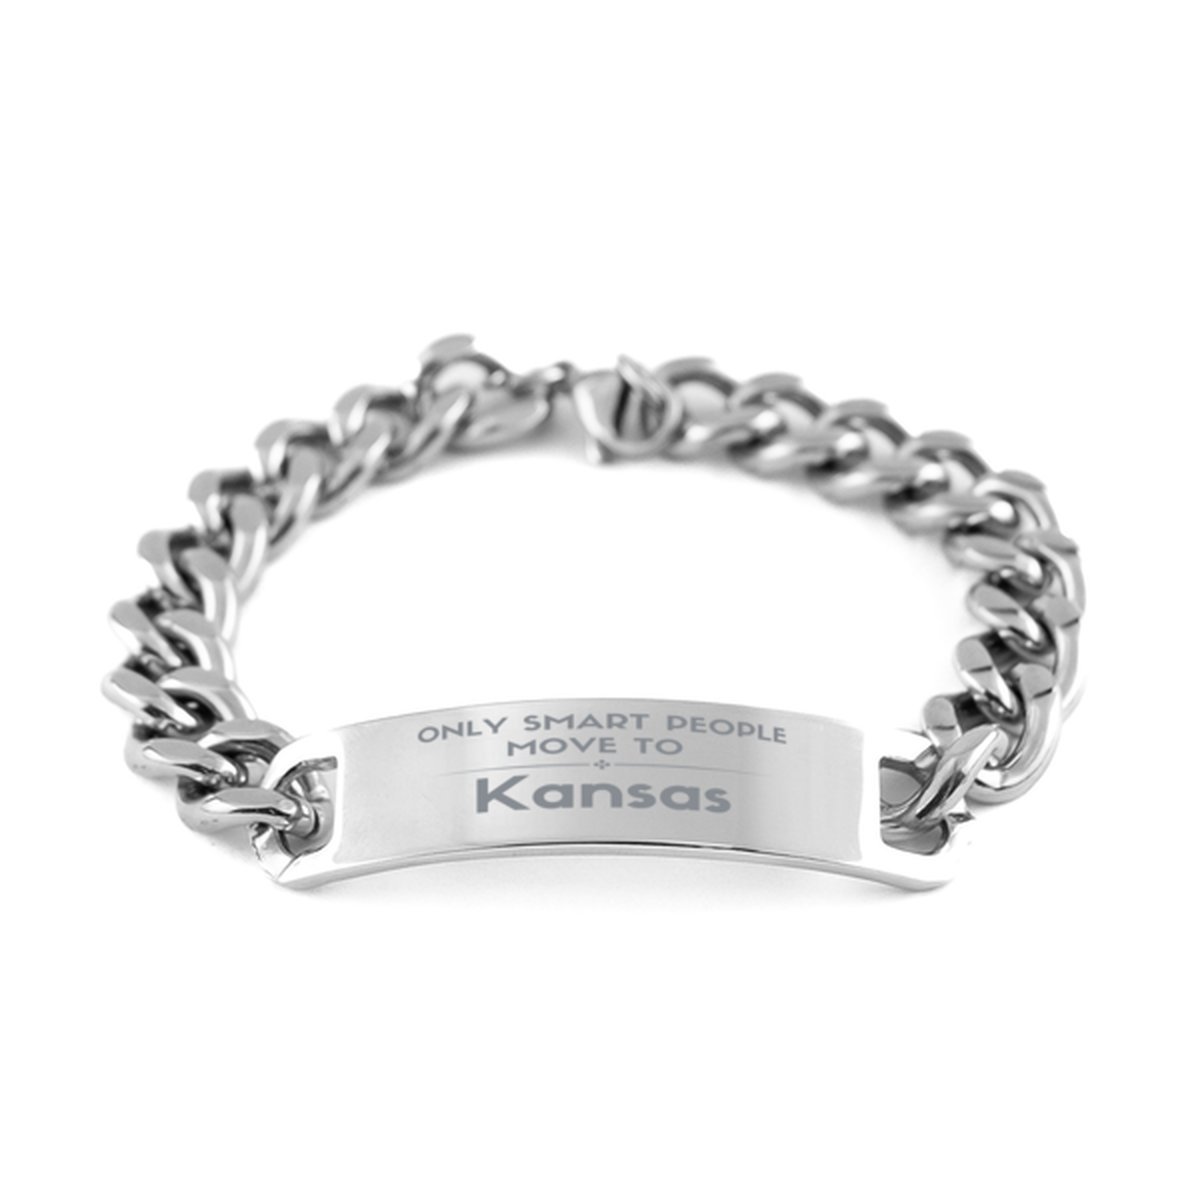 Only smart people move to Kansas Cuban Chain Stainless Steel Bracelet, Gag Gifts For Kansas, Move to Kansas Gifts for Friends Coworker Funny Saying Quote